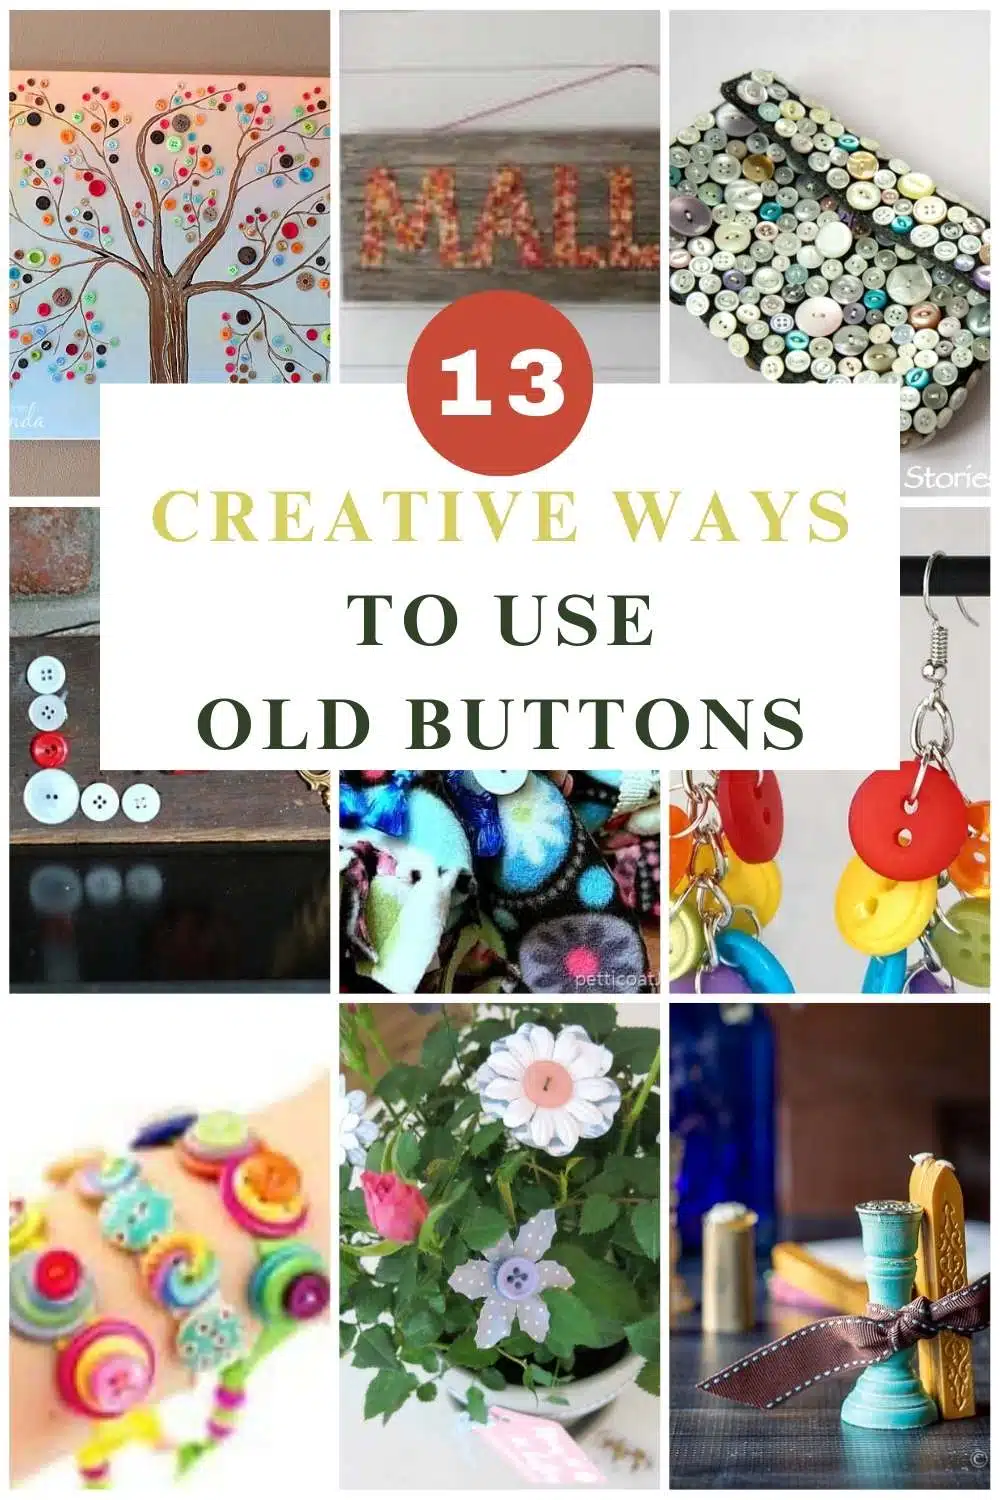 13 Brilliant Ways to Reuse Old Buttons